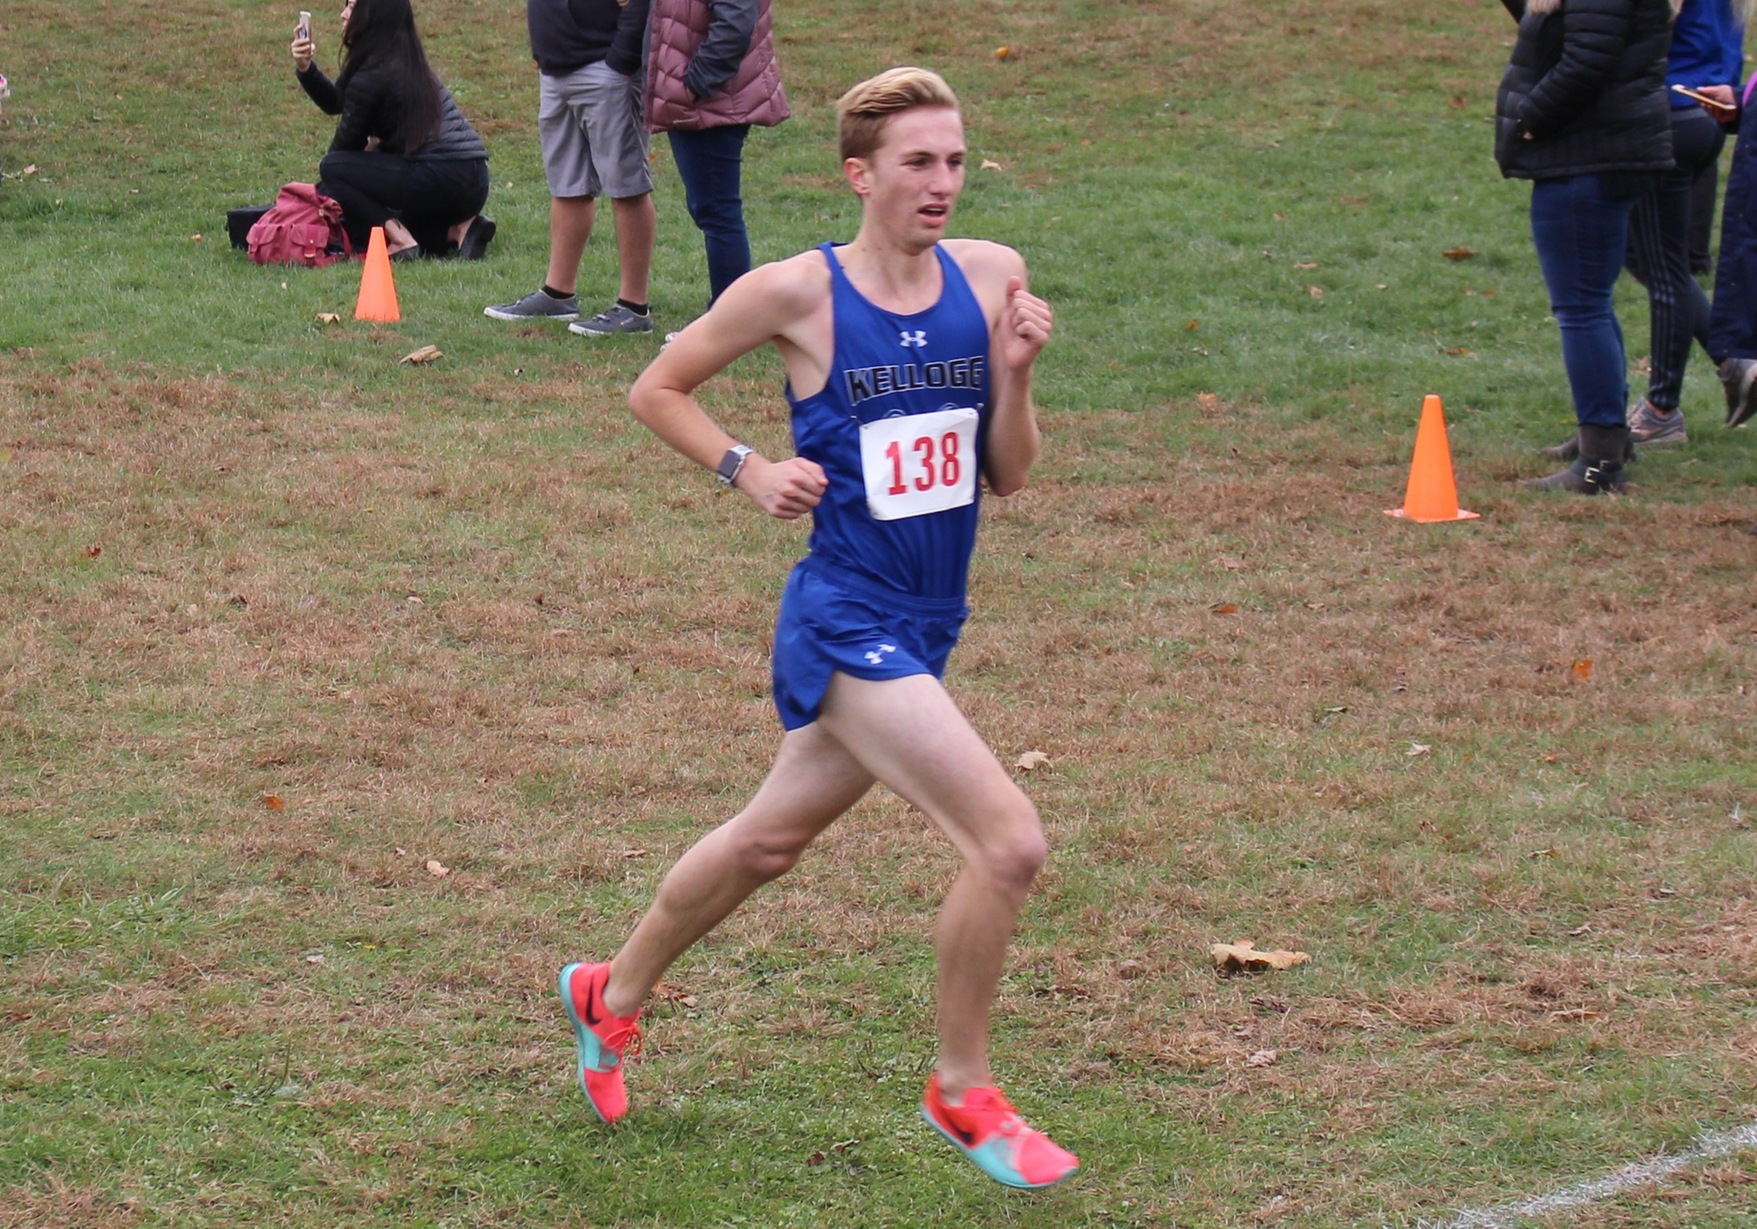 Kellogg's Kyle Strong coming to the finish of the NJCAA Region XII Division III Cross Country Championship